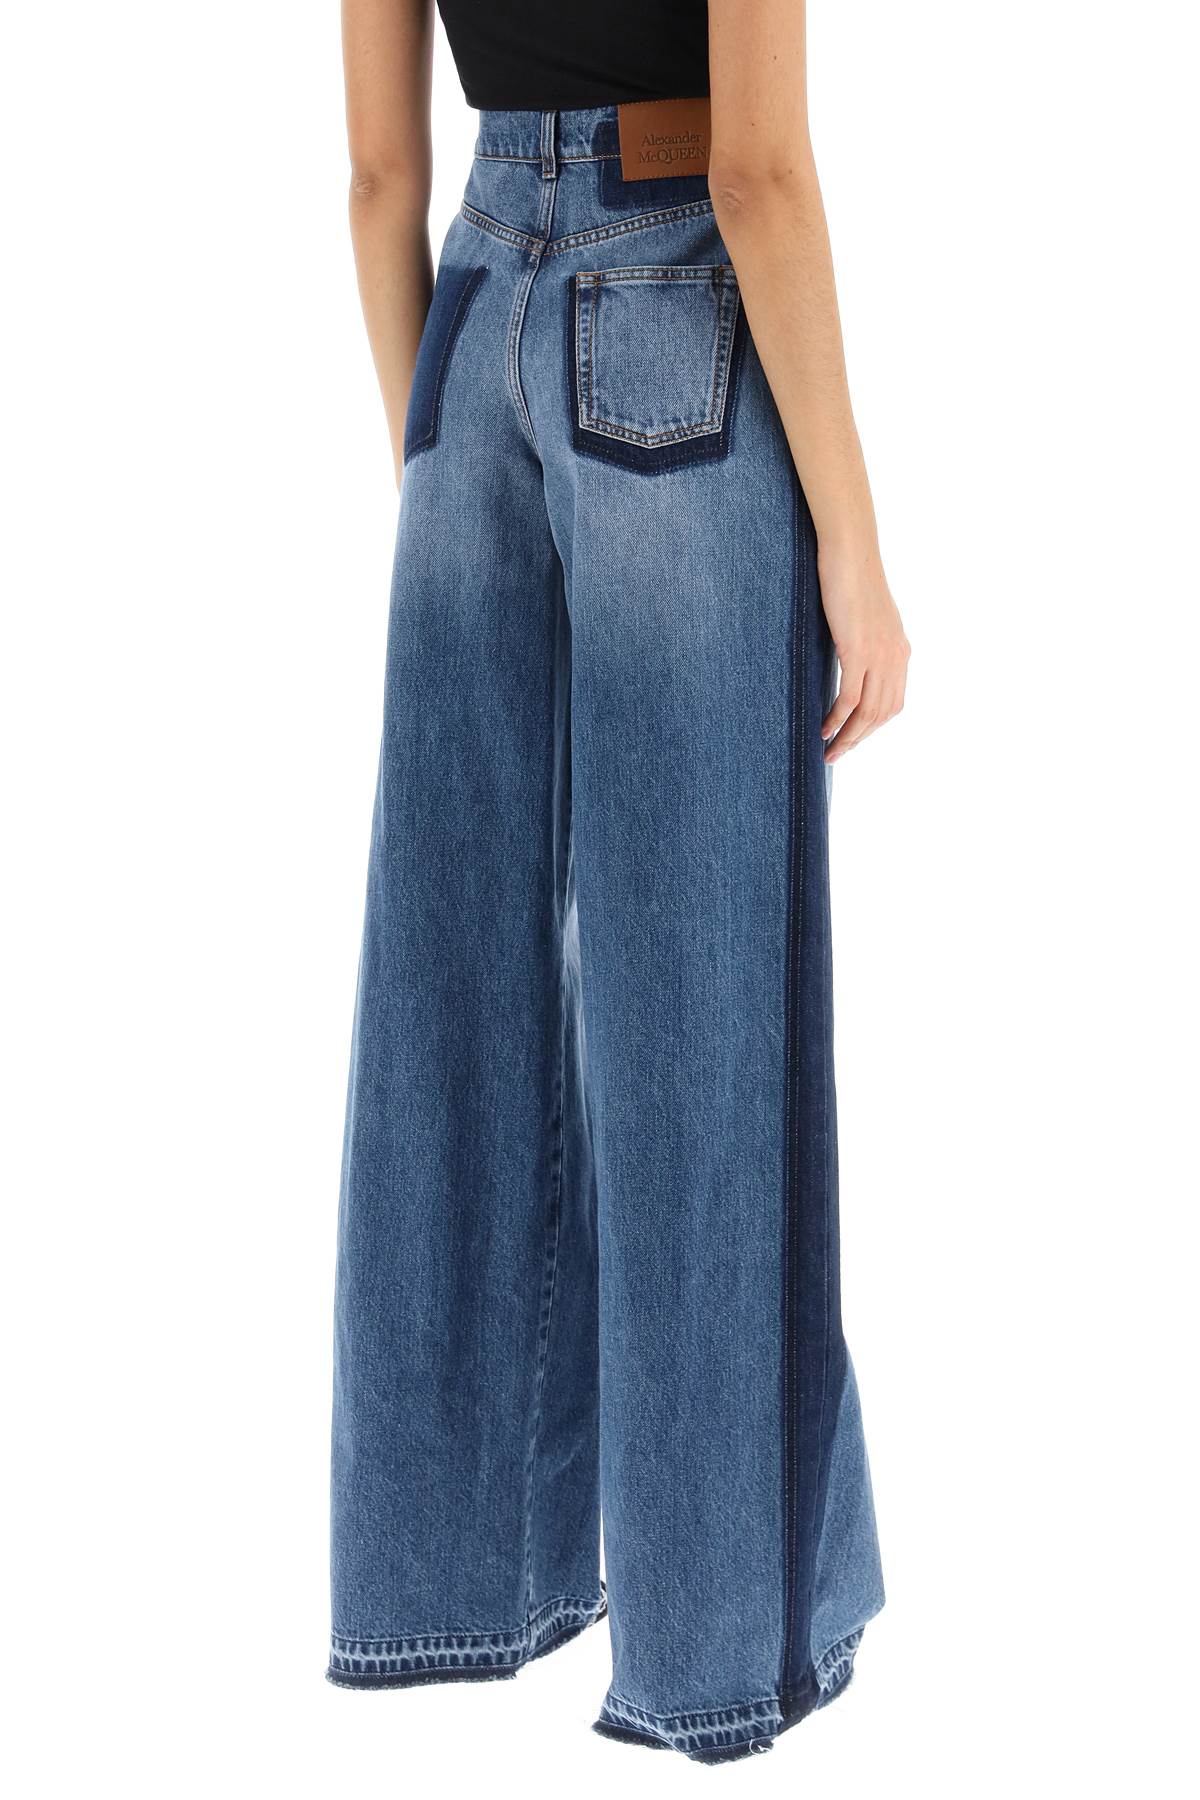 Alexander mcqueen wide leg jeans with contrasting details-2